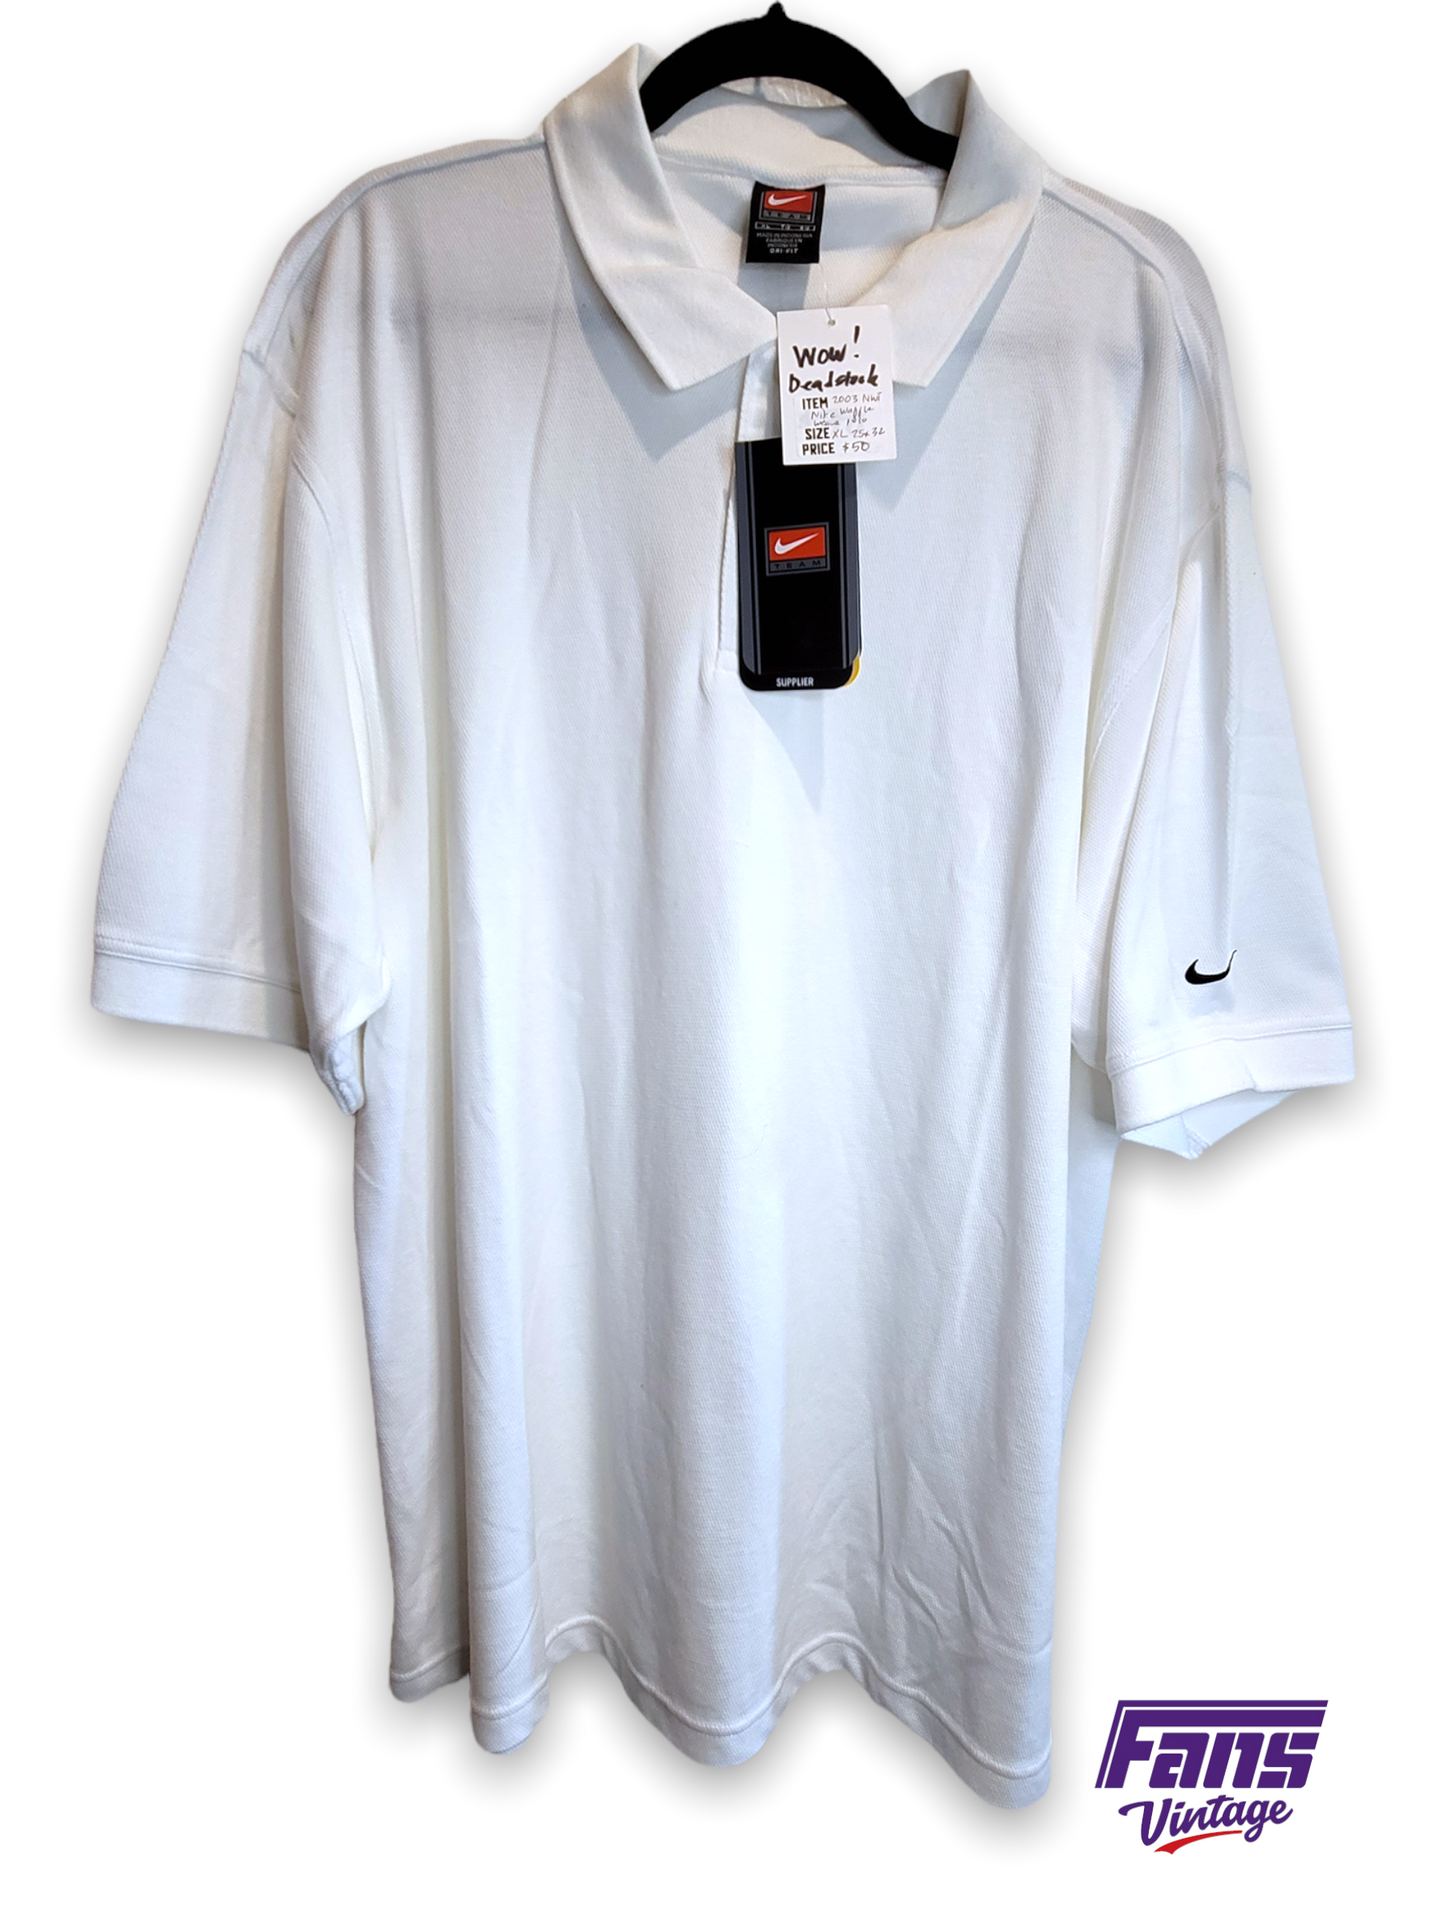 Vintage 2003 New with Tags Nike waffle weave cotton Polo